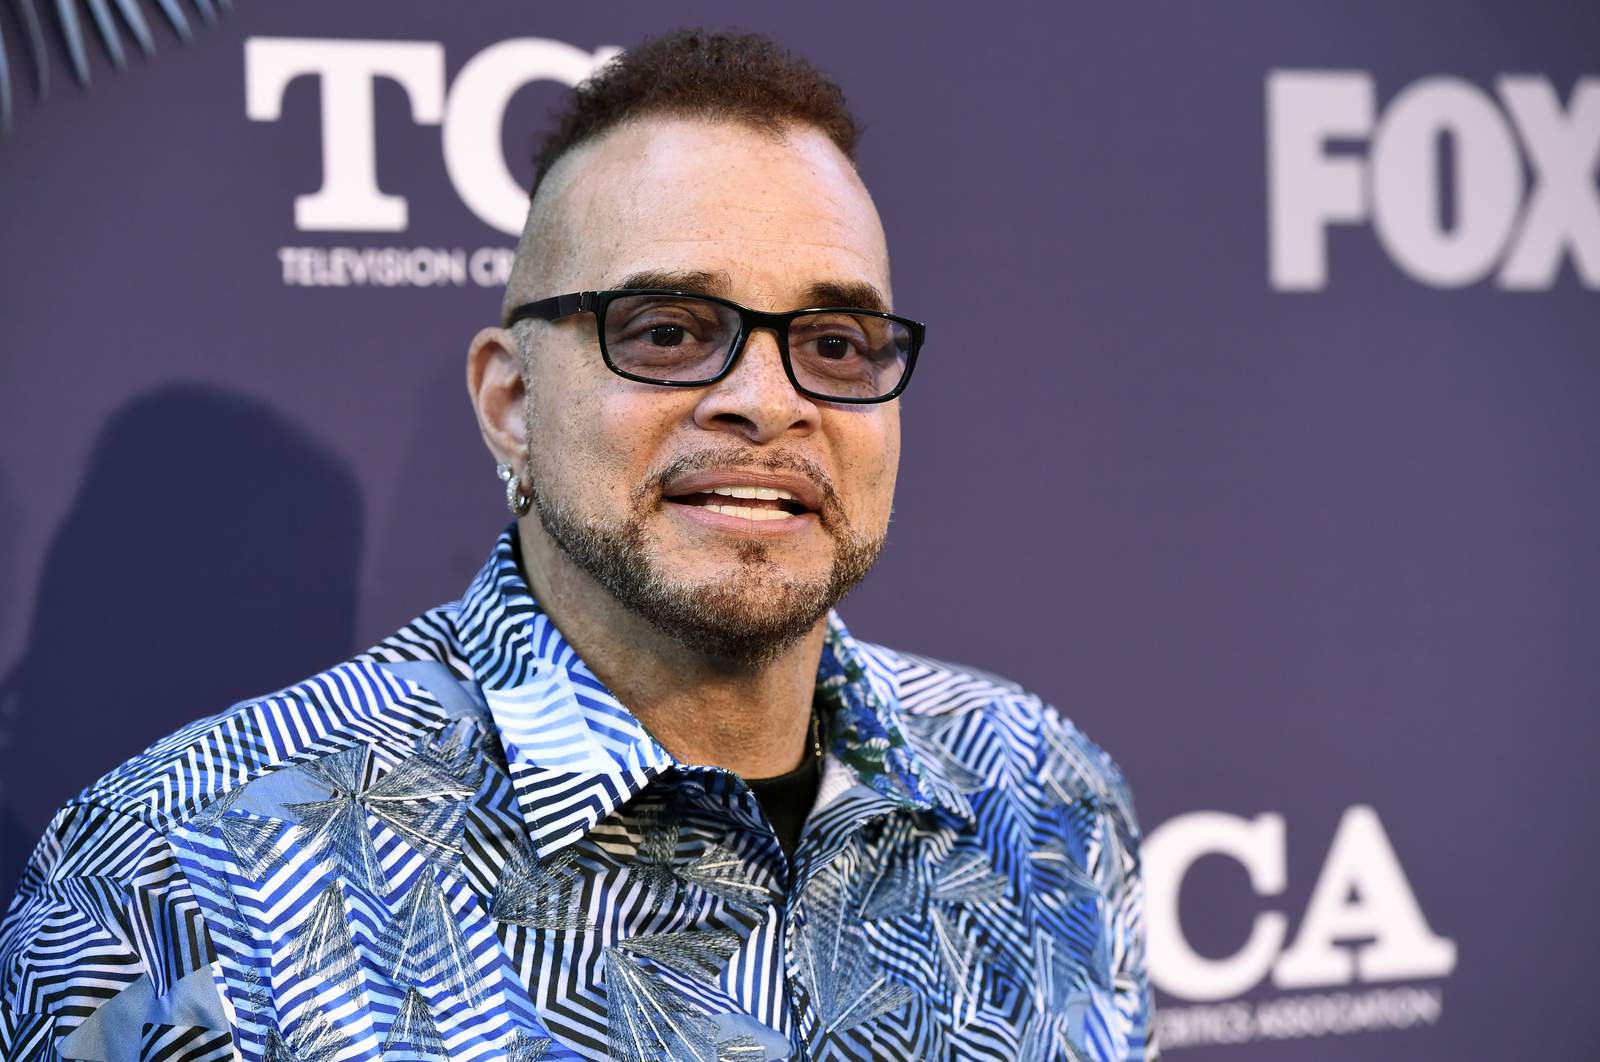 Family: Comedian Sinbad recovering from recent stroke